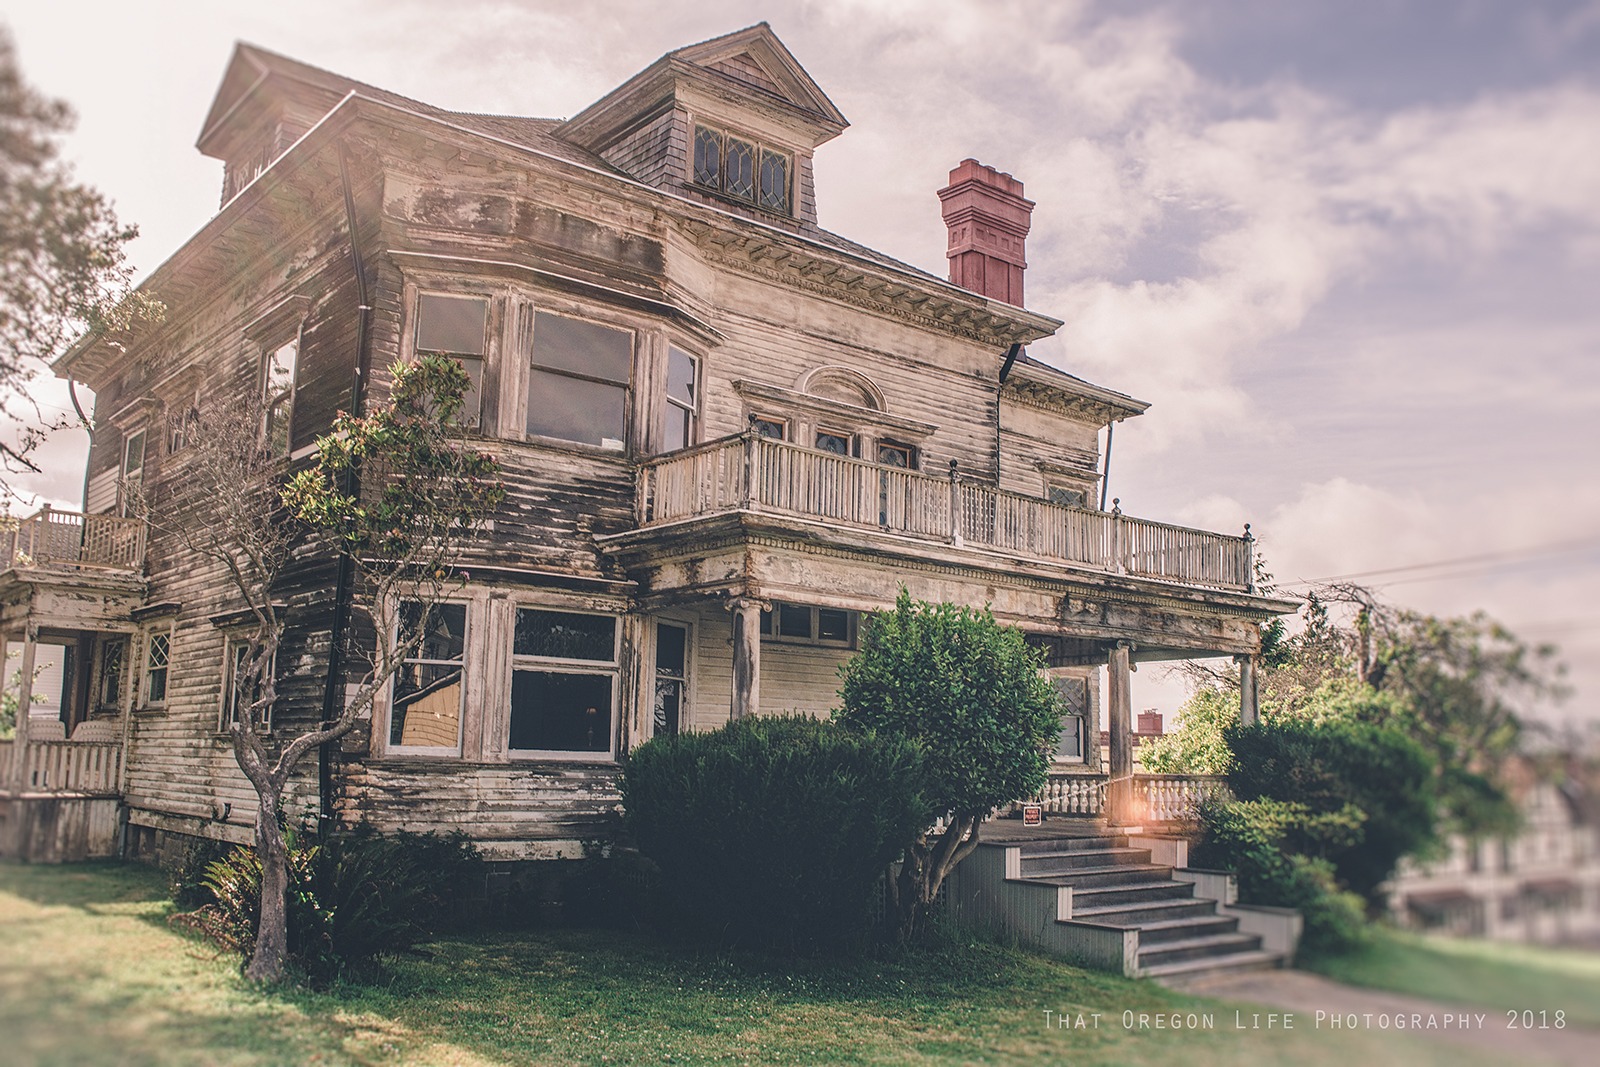 This Abandoned House on the Oregon Coast Has a Haunting History